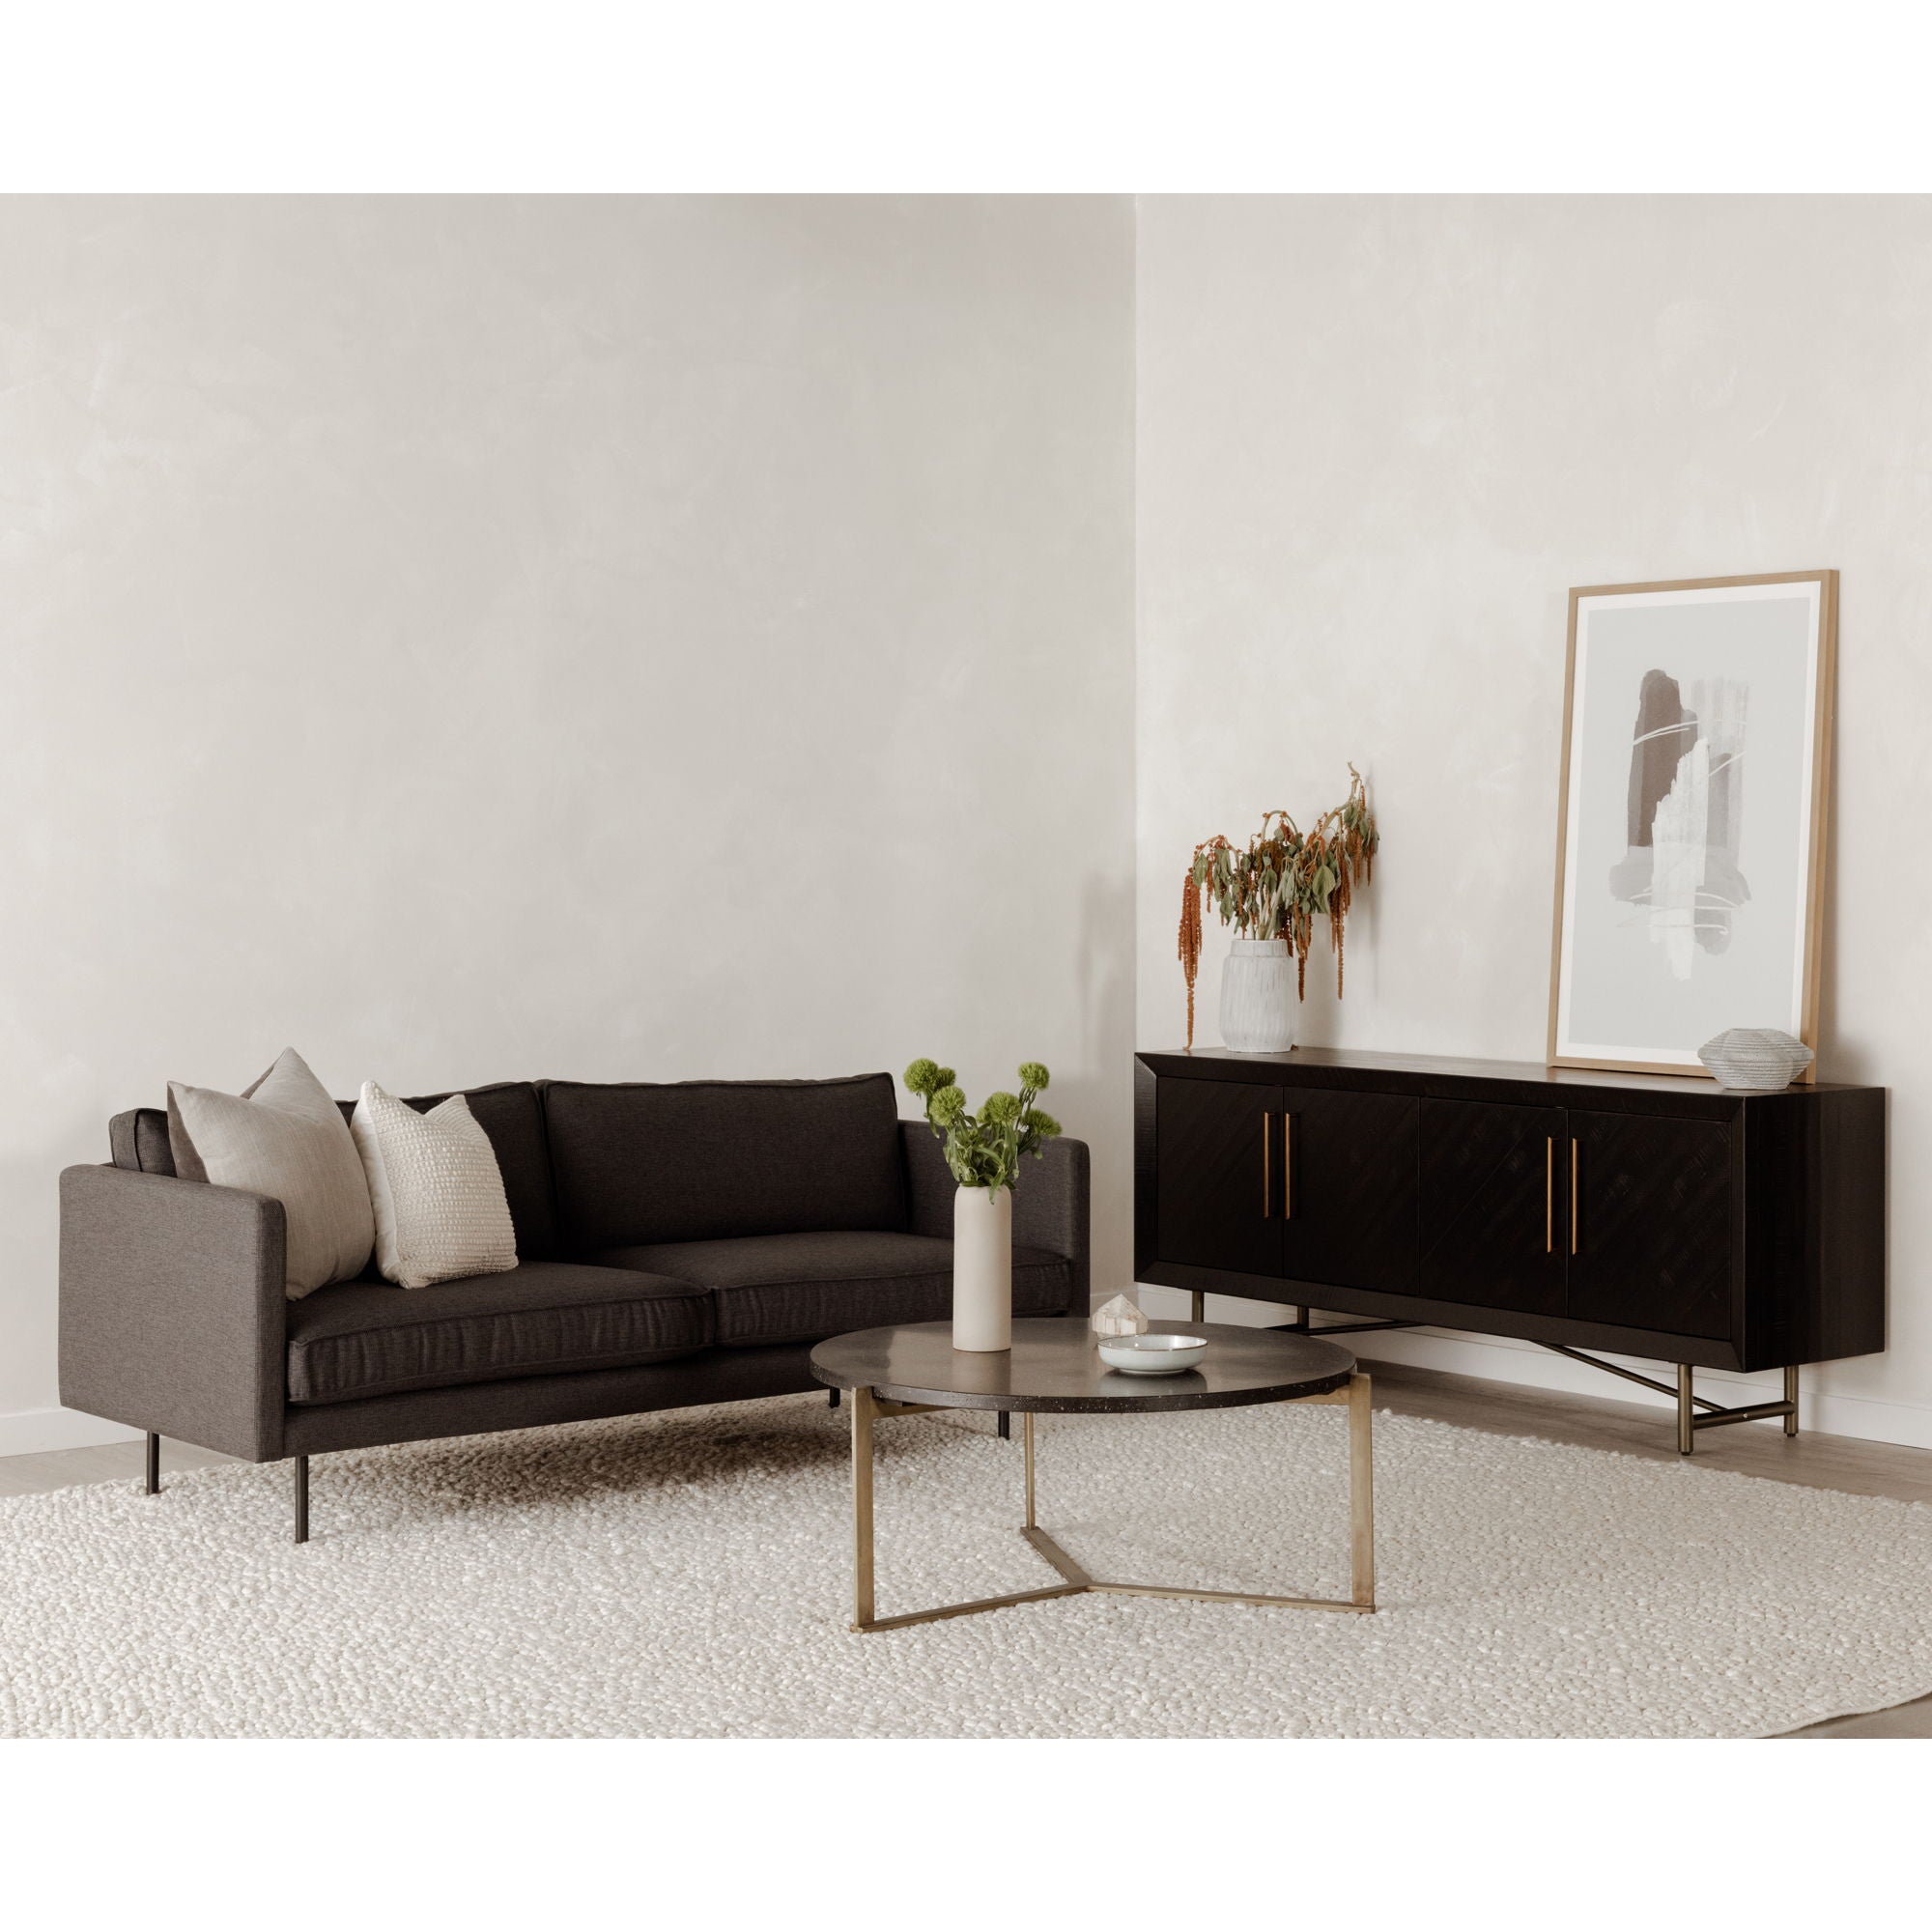 Plunge Beige Sectional - Modern & Modular-Stationary Sectionals-American Furniture Outlet